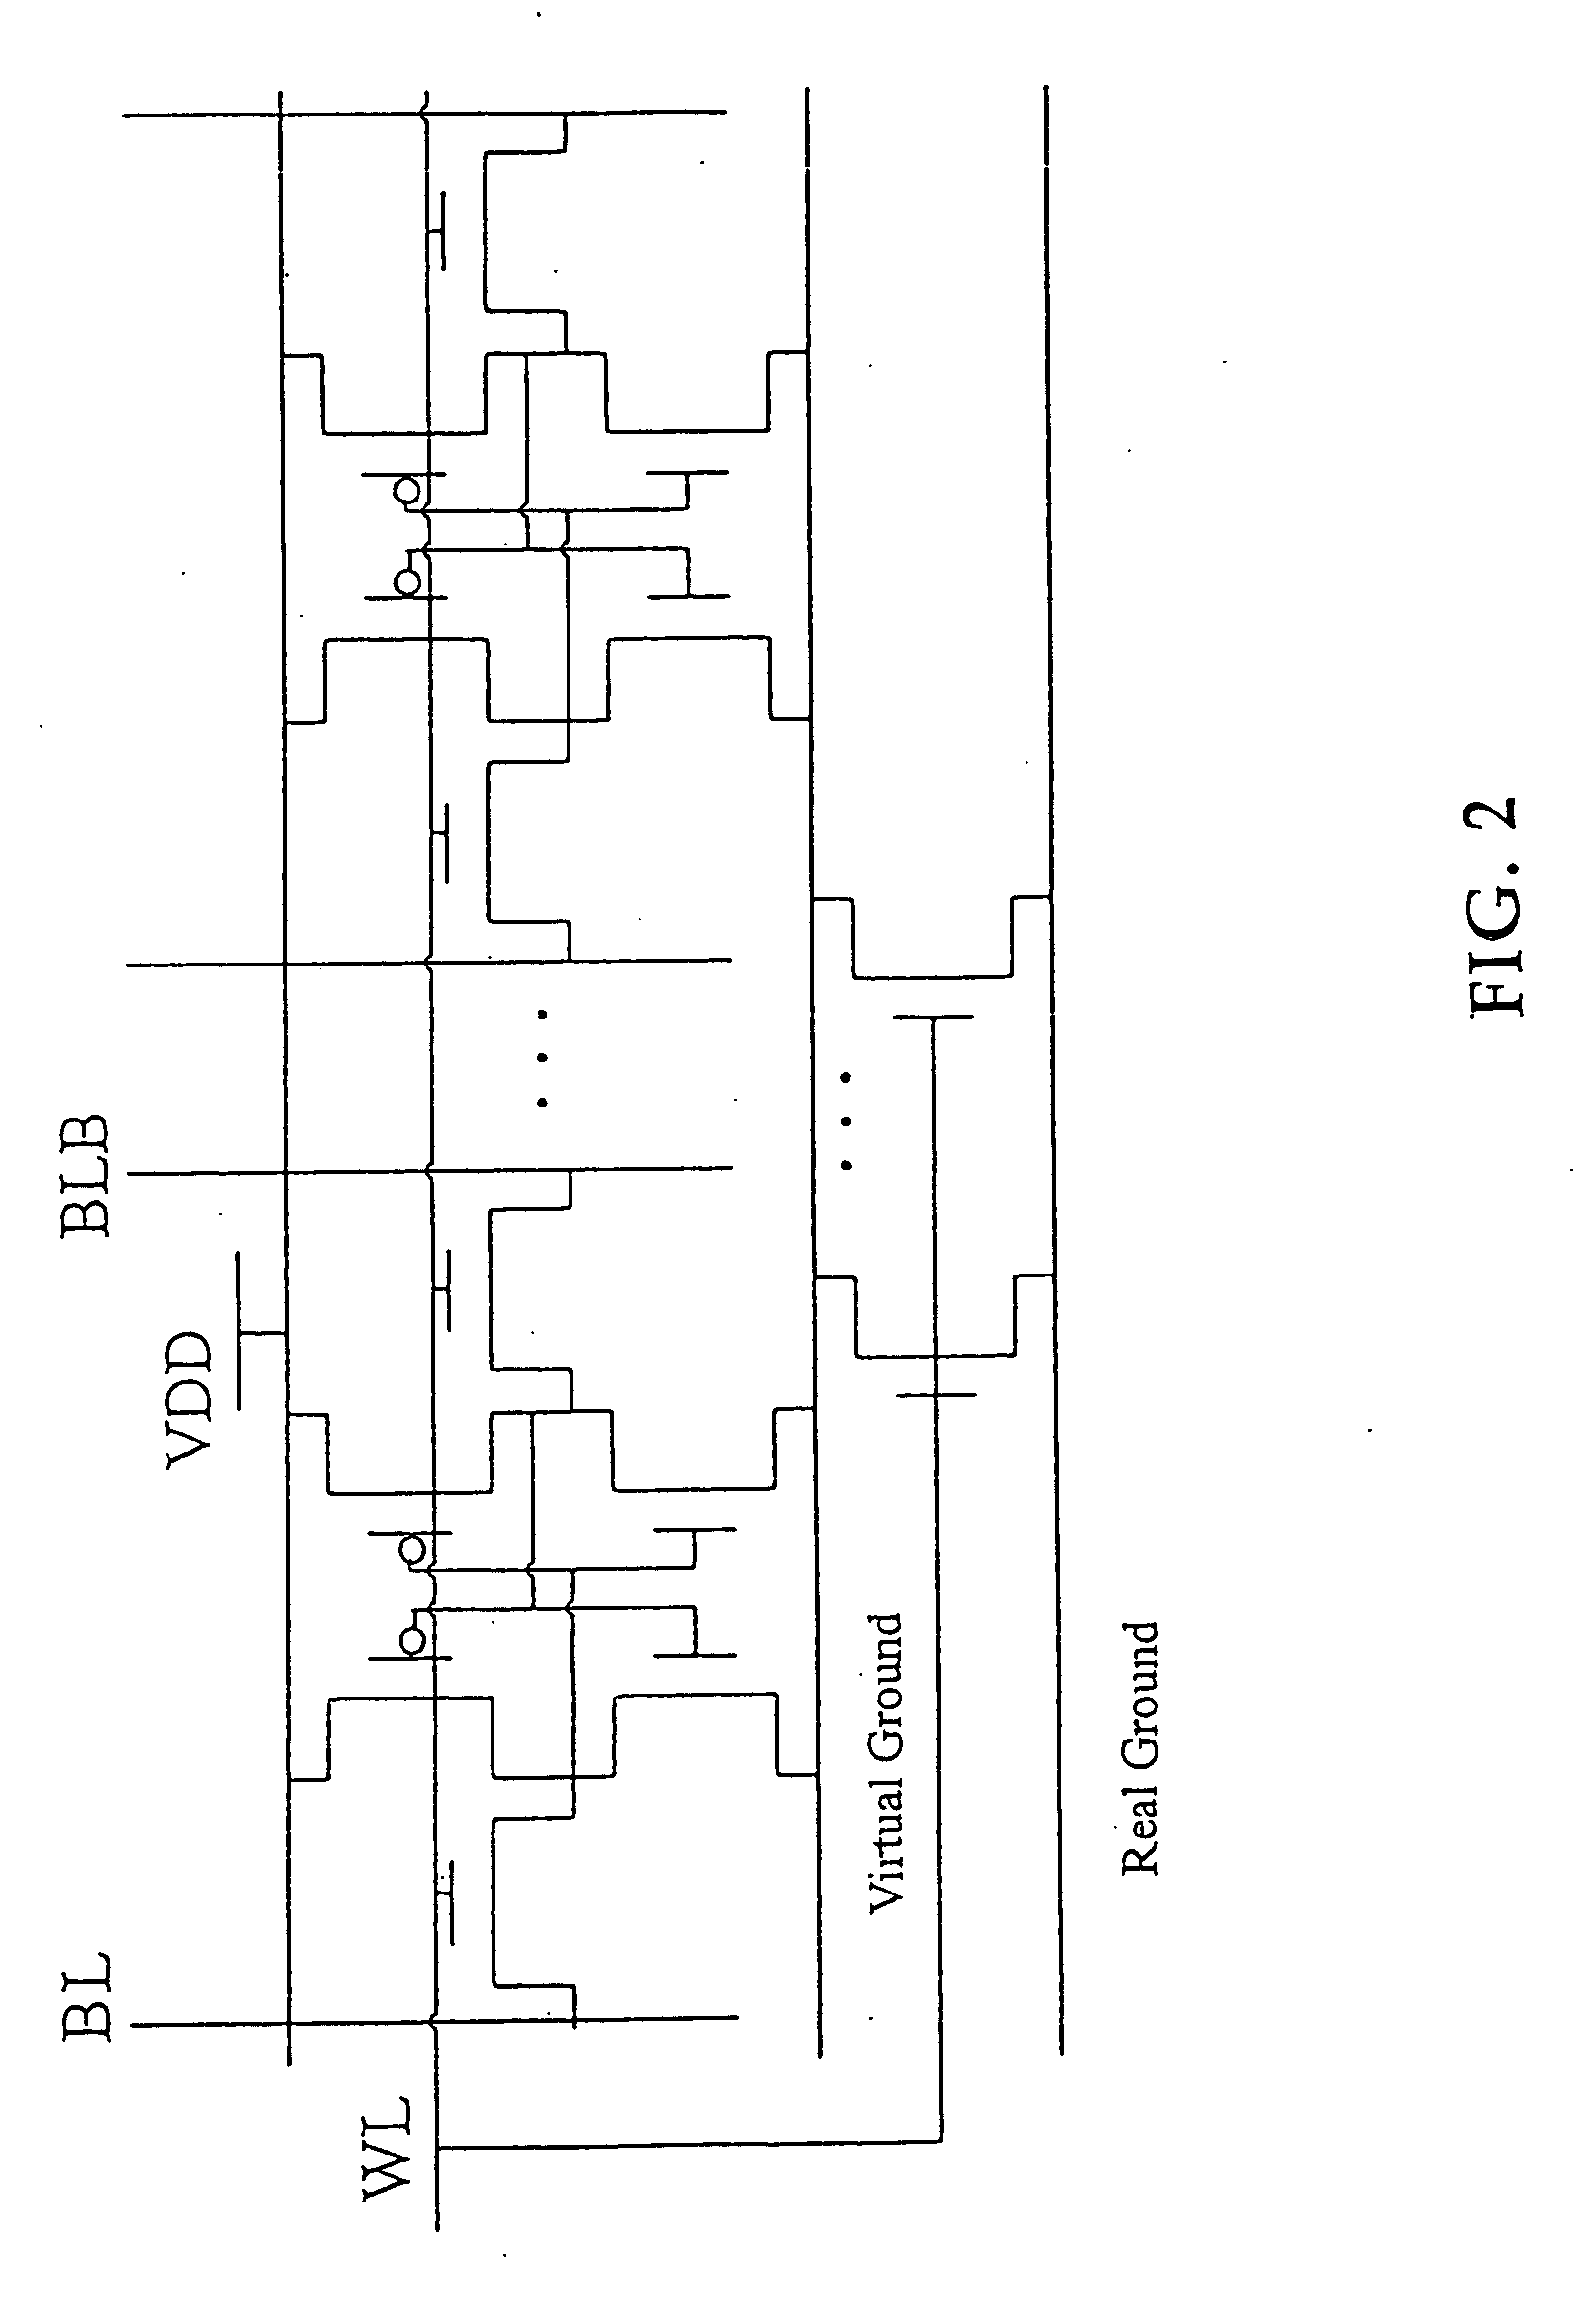 Power gating structure having data retention and intermediate modes